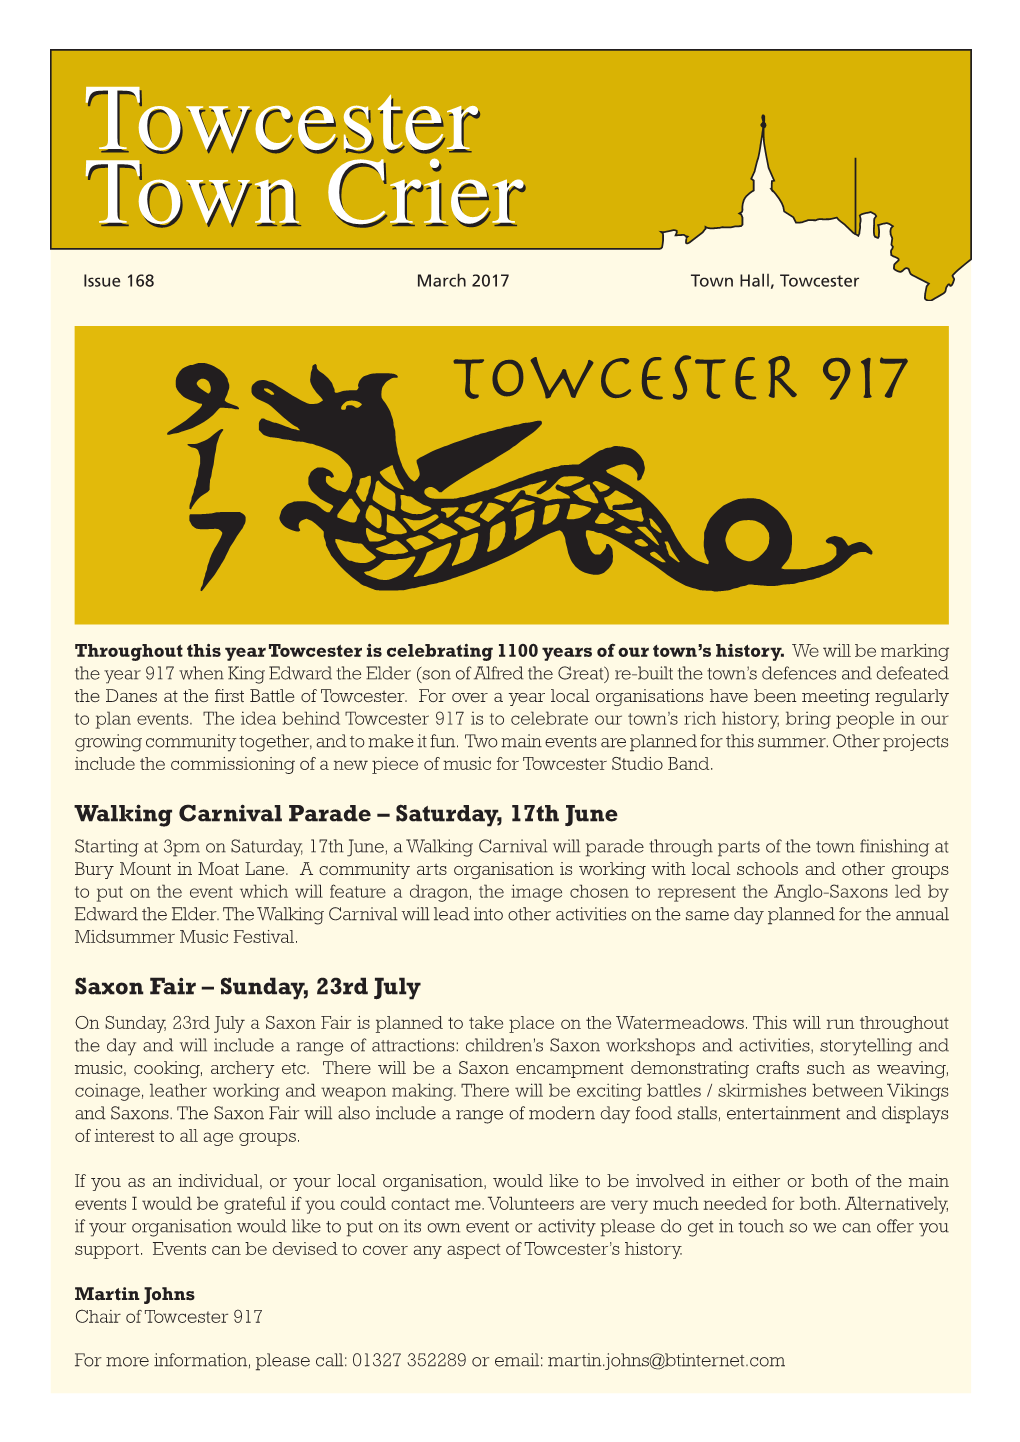 Towcester Town Crier Is Published by Towcester Town Council and Is Open to Contributions from All Organisations and Individuals in the Town